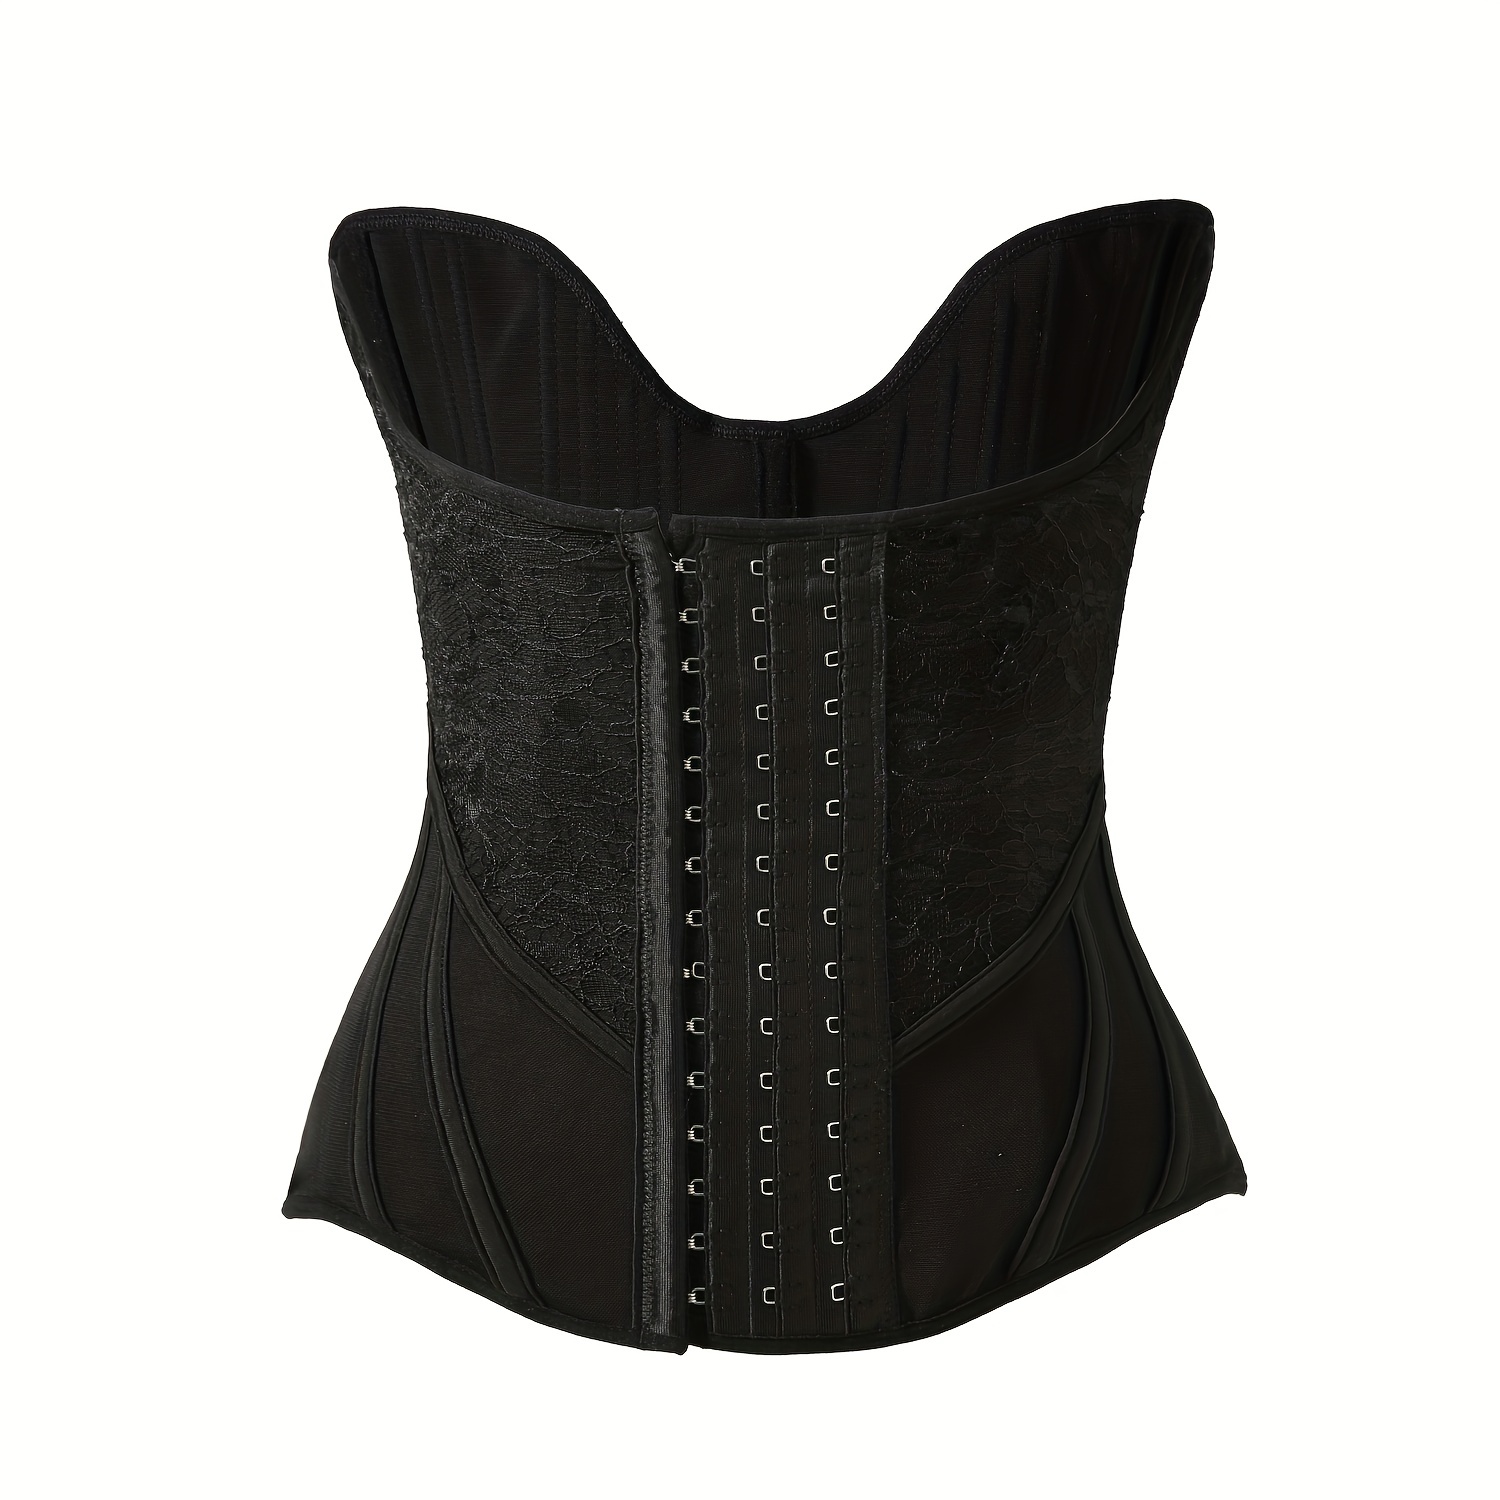 Body Shapewear for Women - Corset Waist Trainer Tummy Control Belt - Size  Up for Perfect Fit